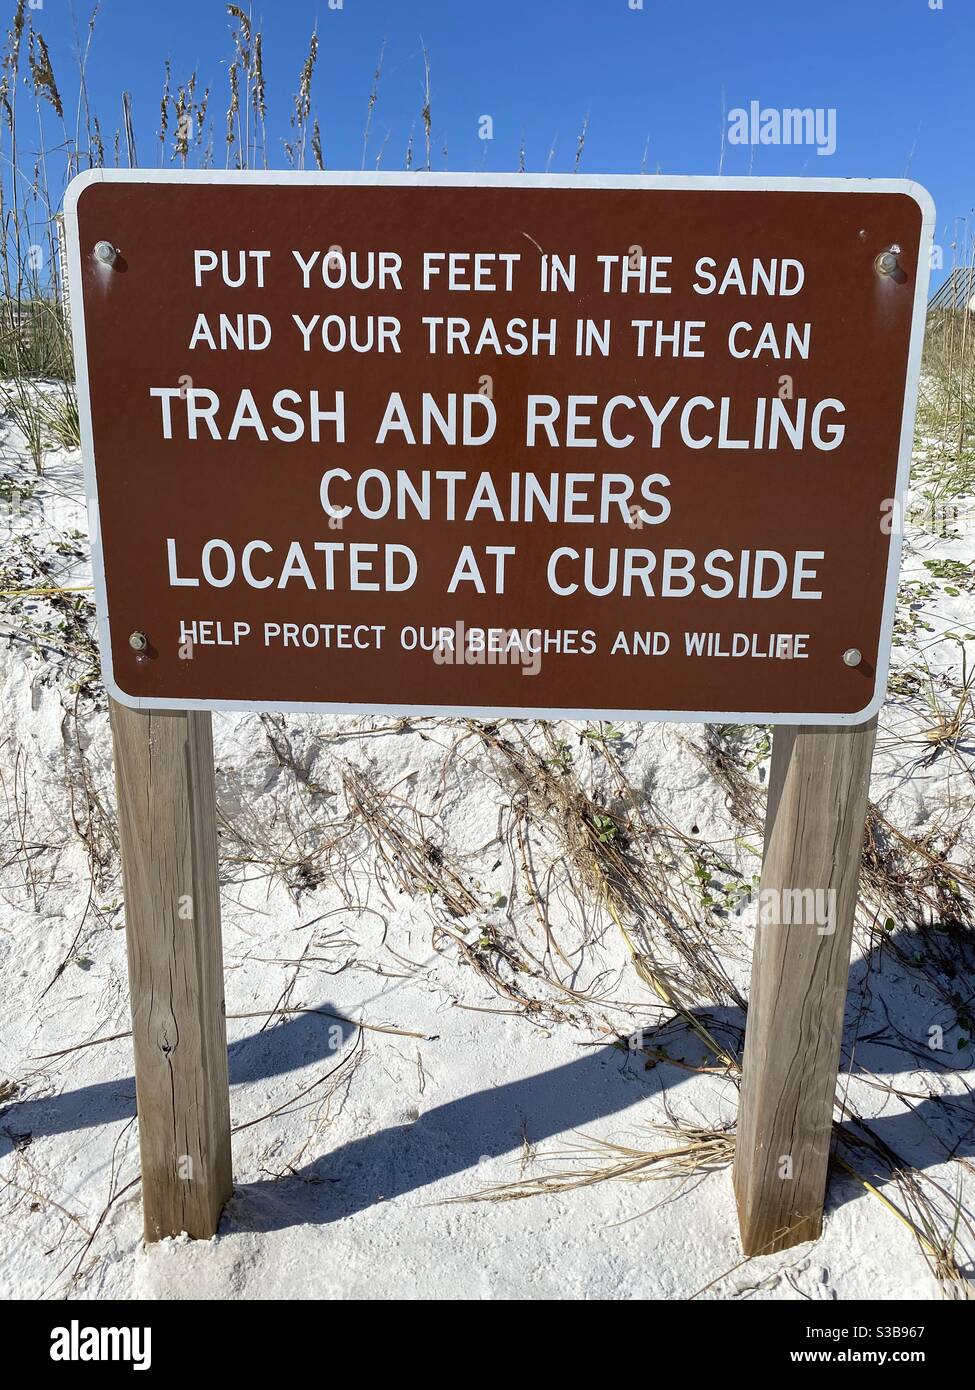 Public message sign to keep the beach clean Stock Photo